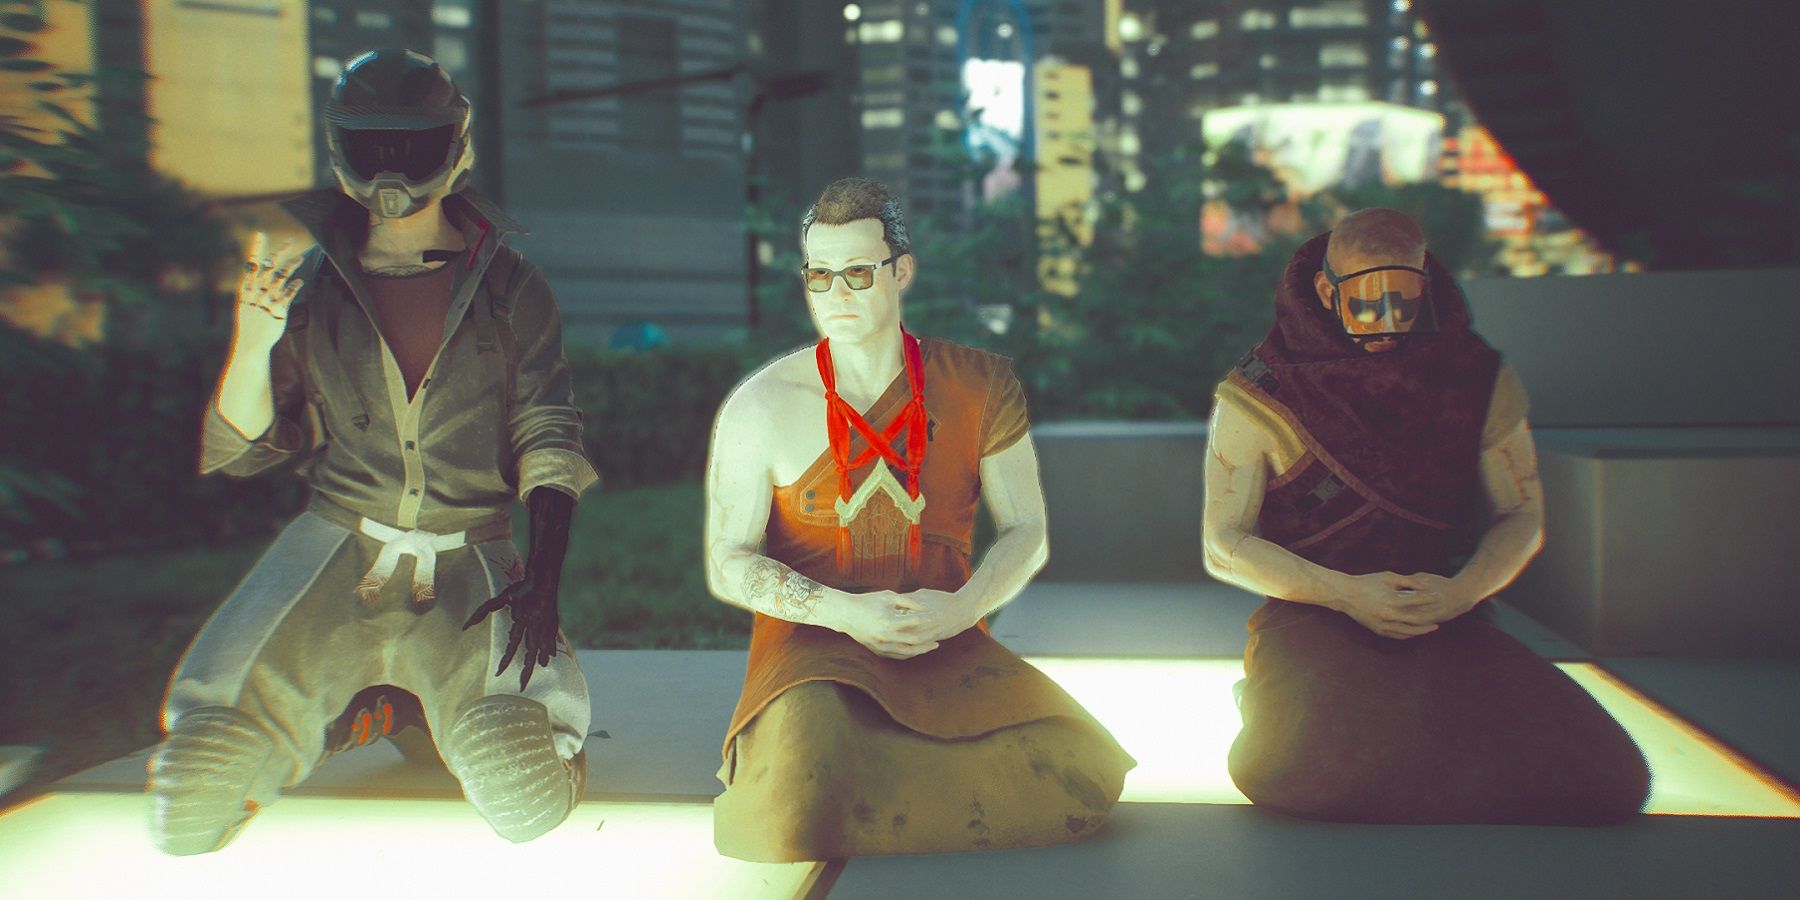 Image from Cyberpunk 2077 showing some NPCs kneeling down to meditate or pray.